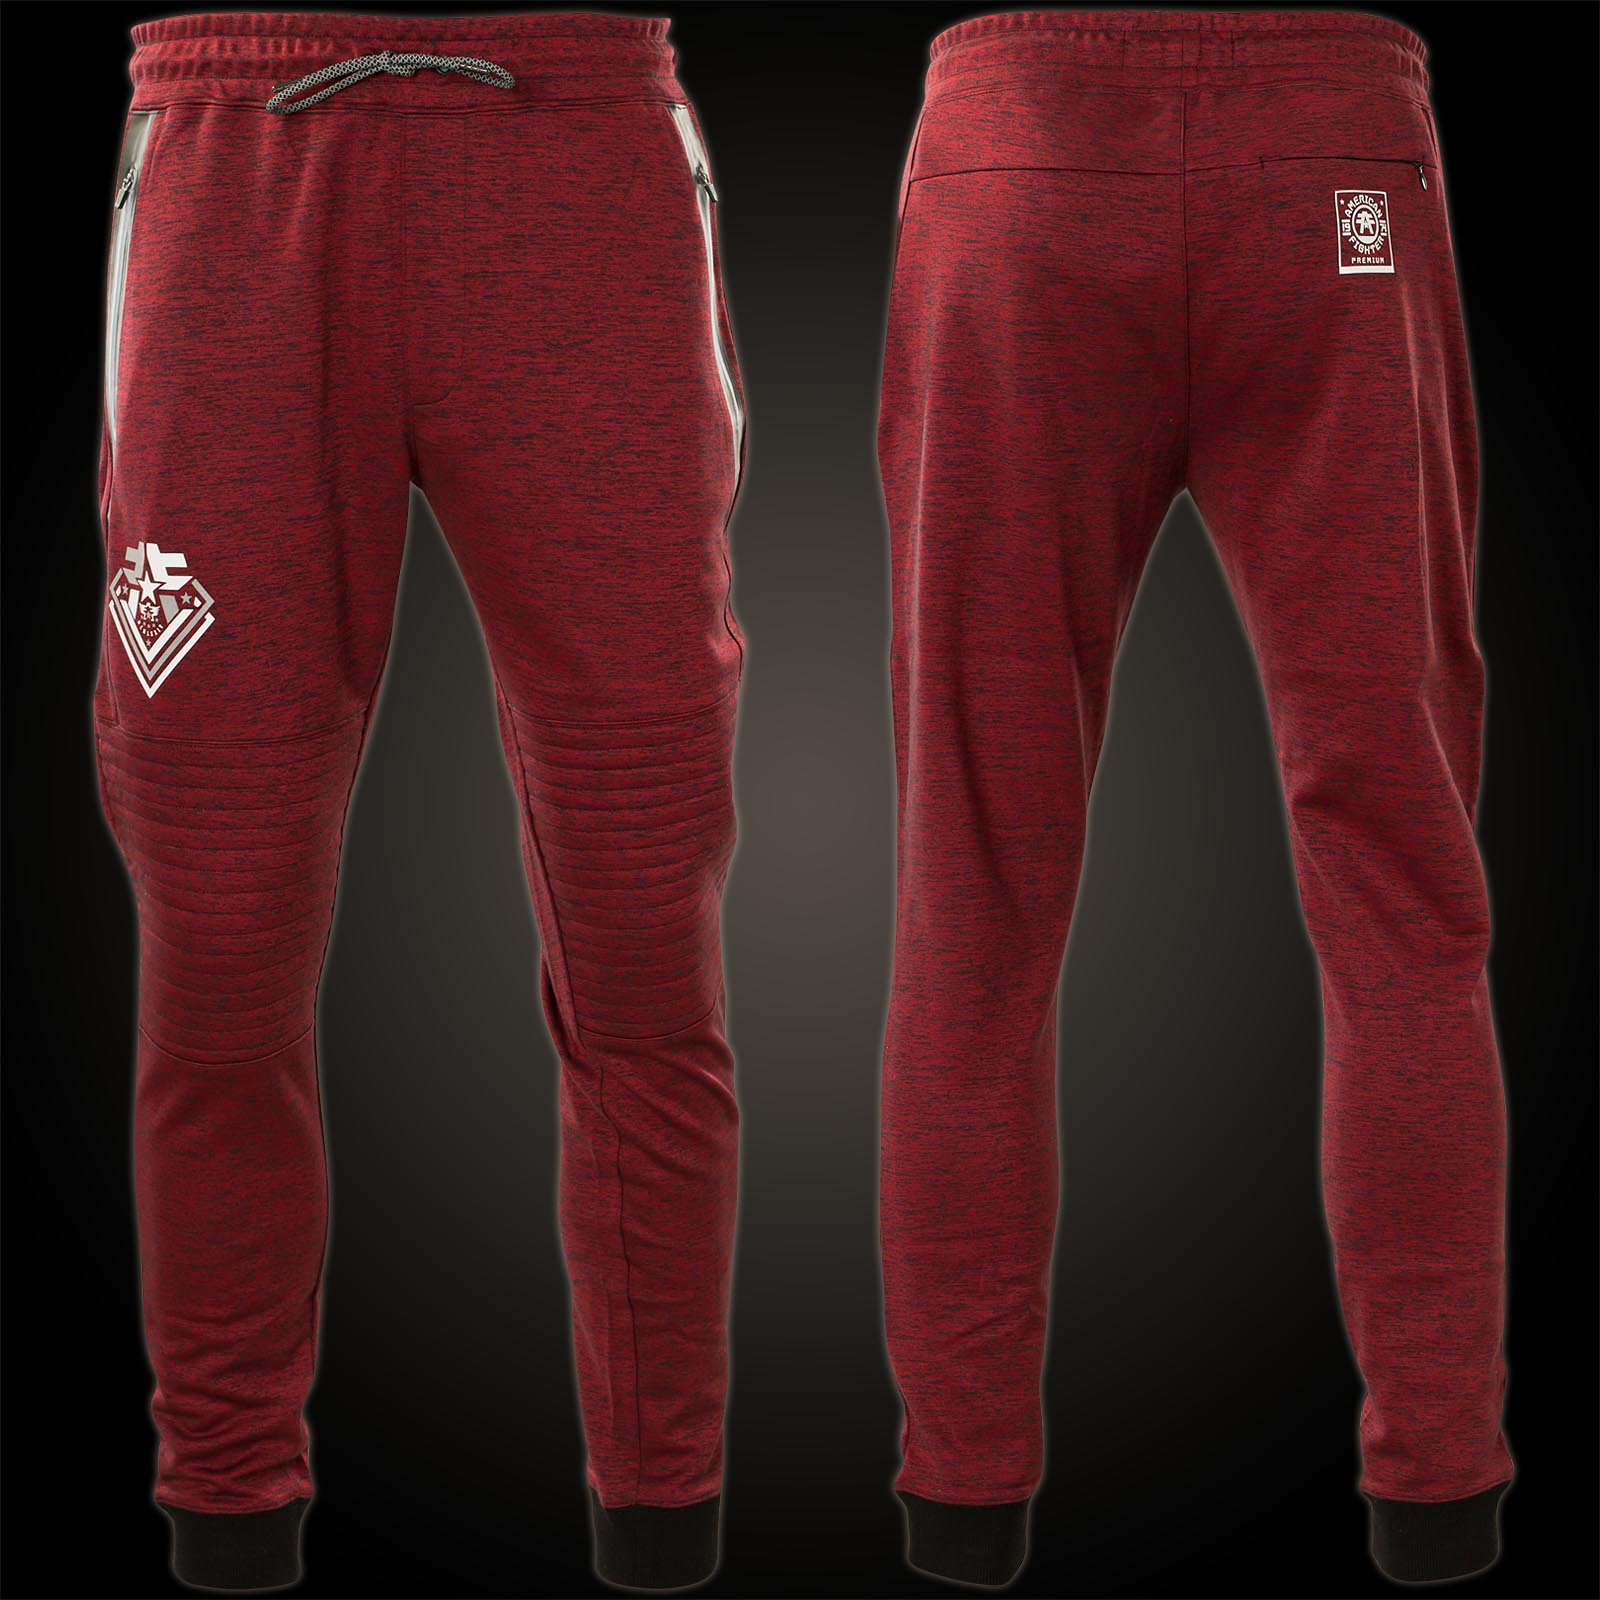 American Fighter by Affliction Sweatpants with a logo print